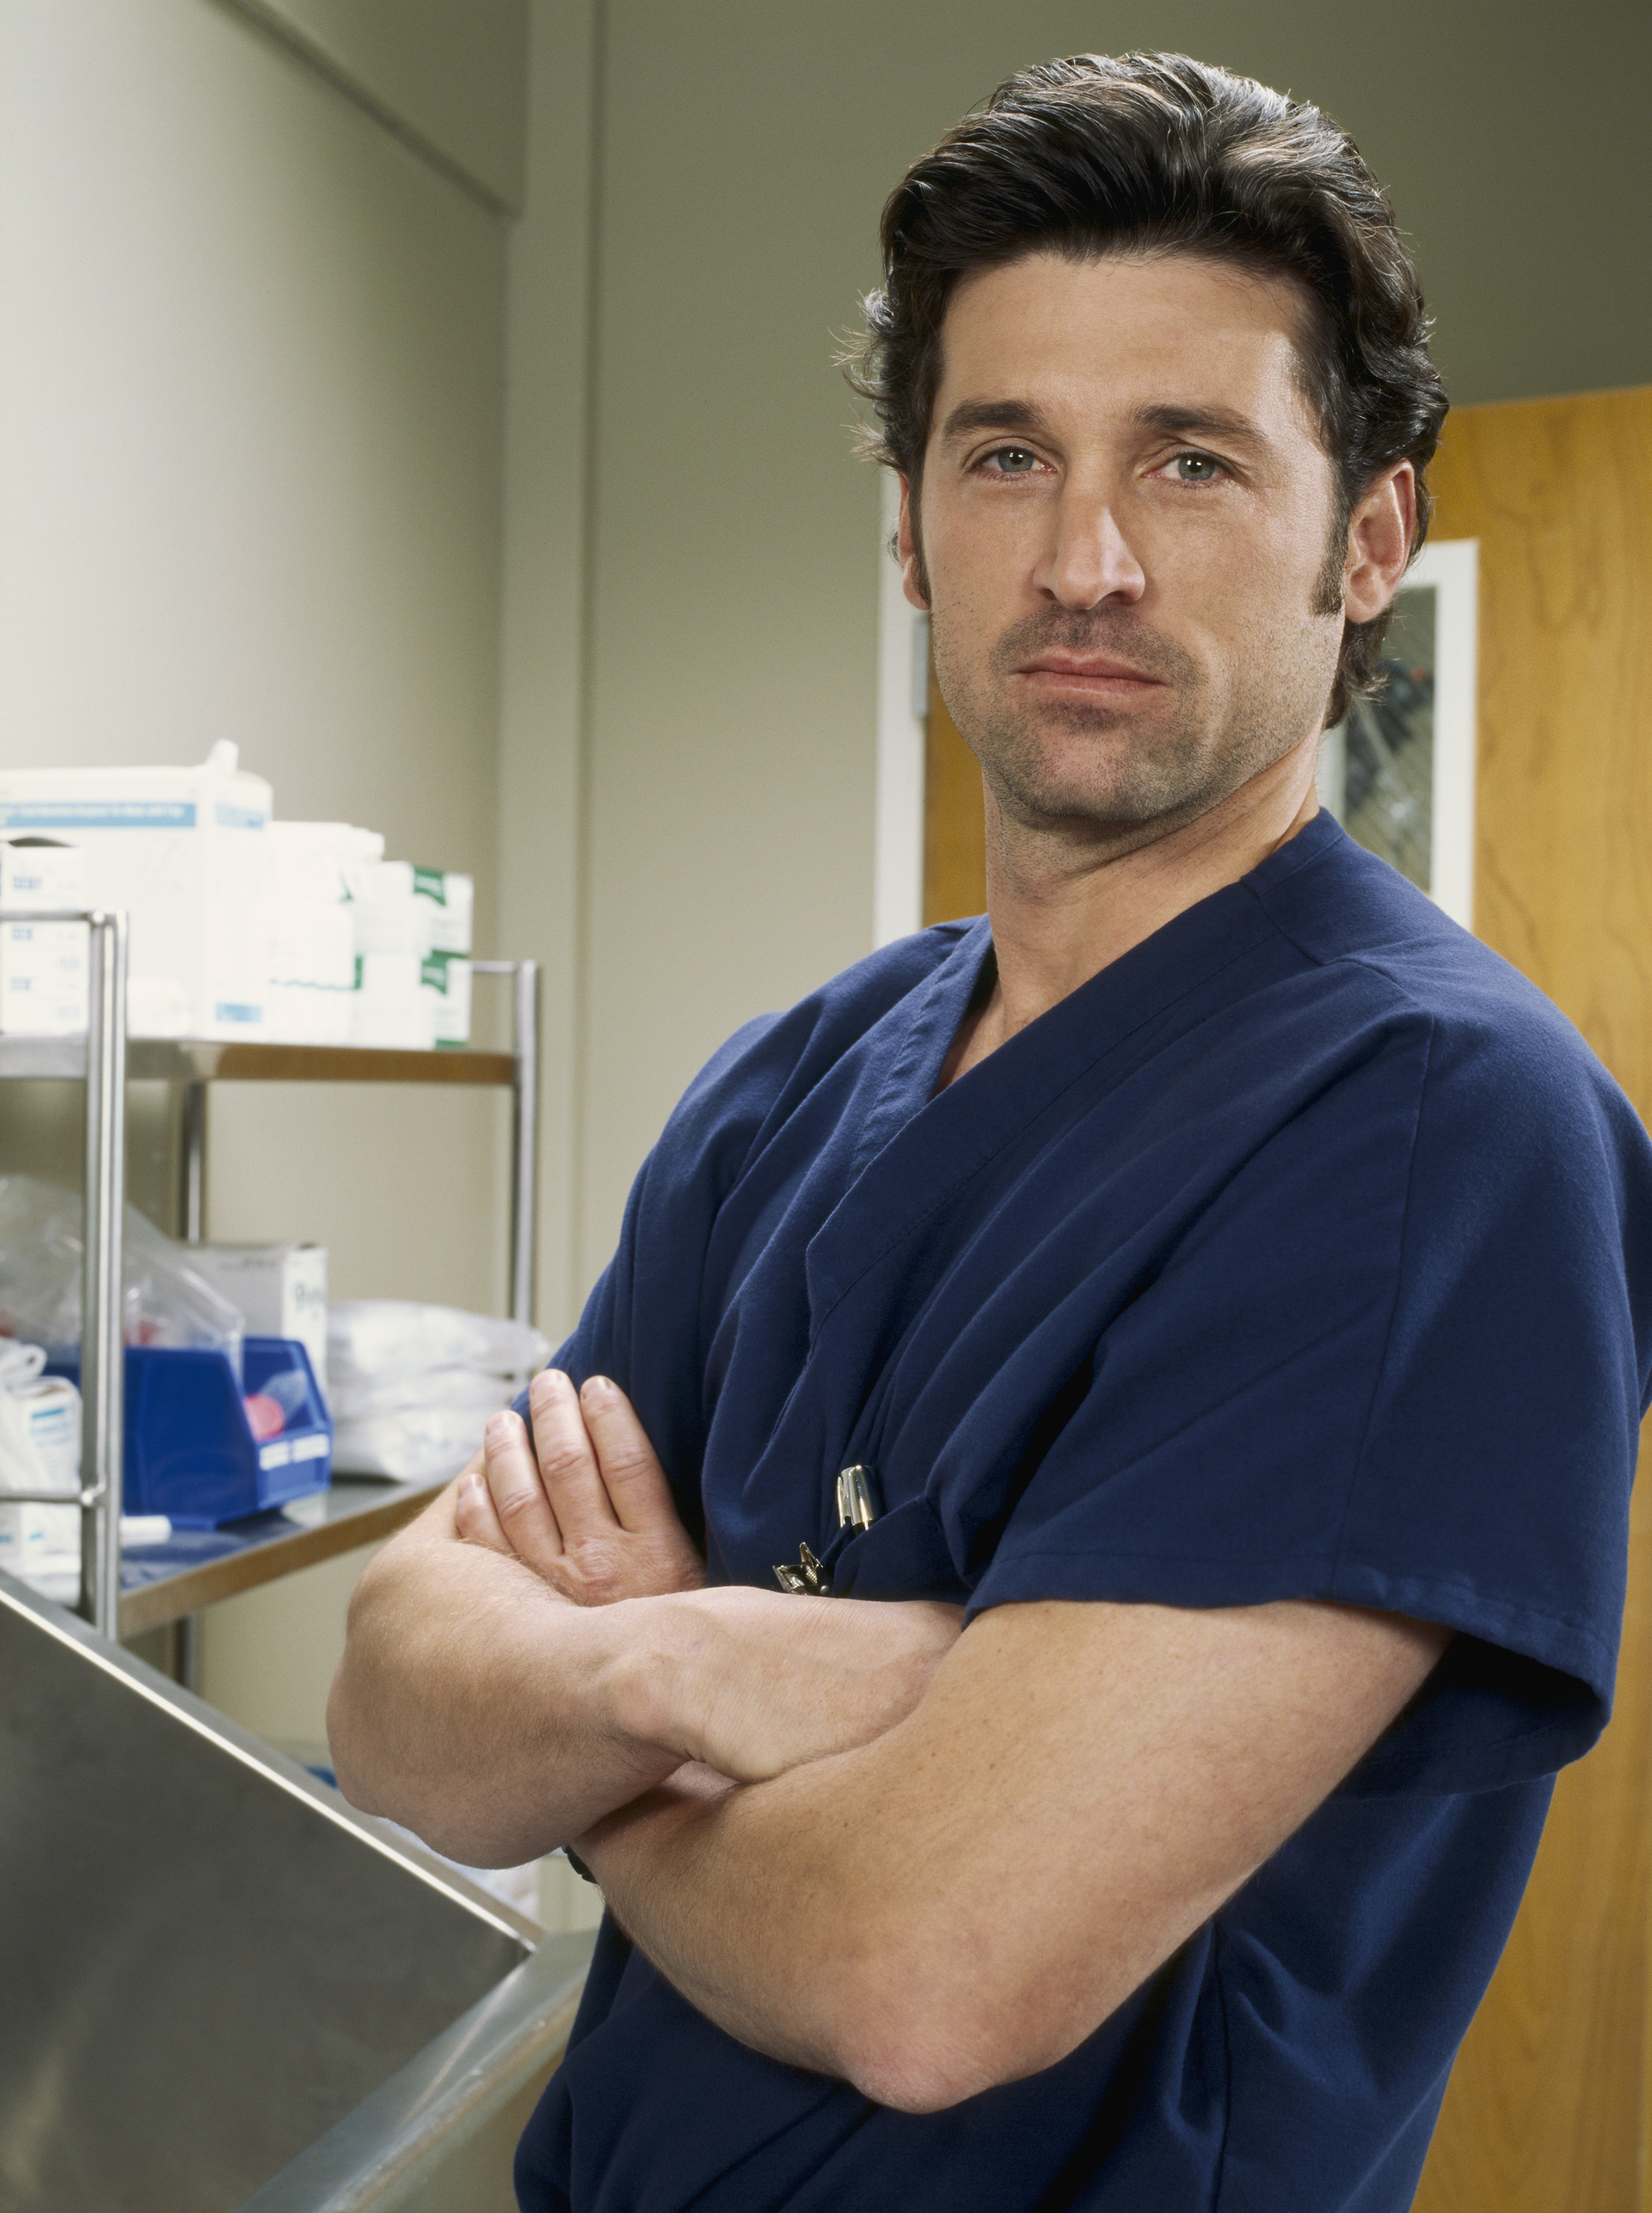 Patrick Dempsey posing as Dr. McDreamy from "Grey's Anatomy" in 2005. | Source: Getty Images